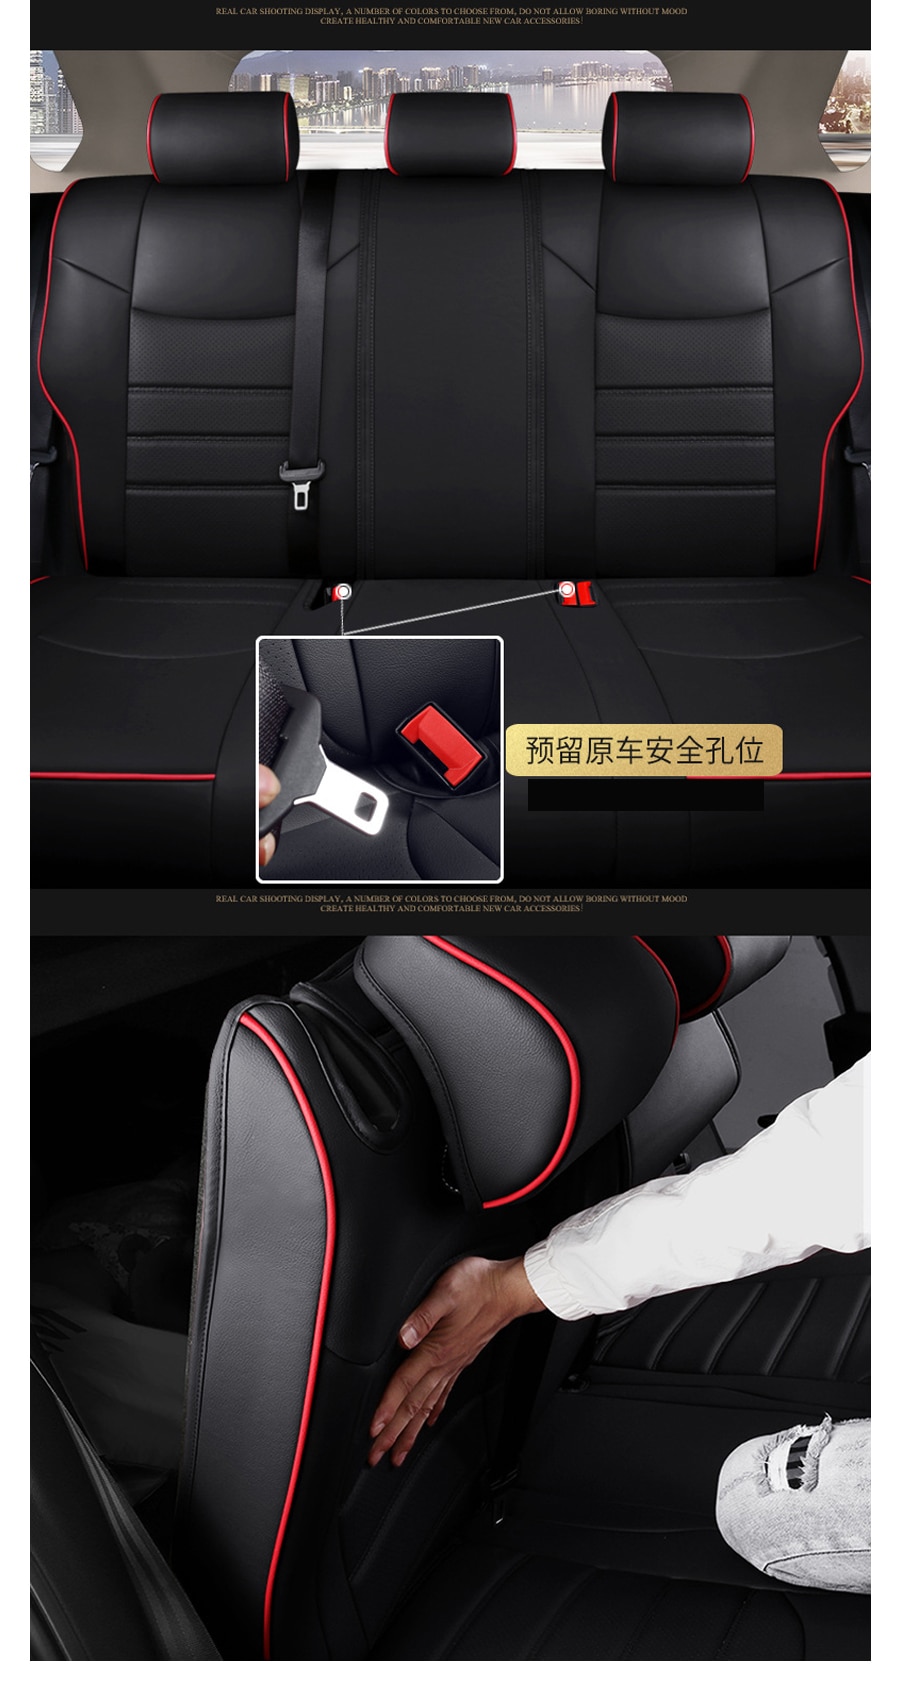 Custom New style Car Seat Covers For Toyota rav4 2020 2021 XA50 model  High-end PU leather Material luxury auto Seats protect set